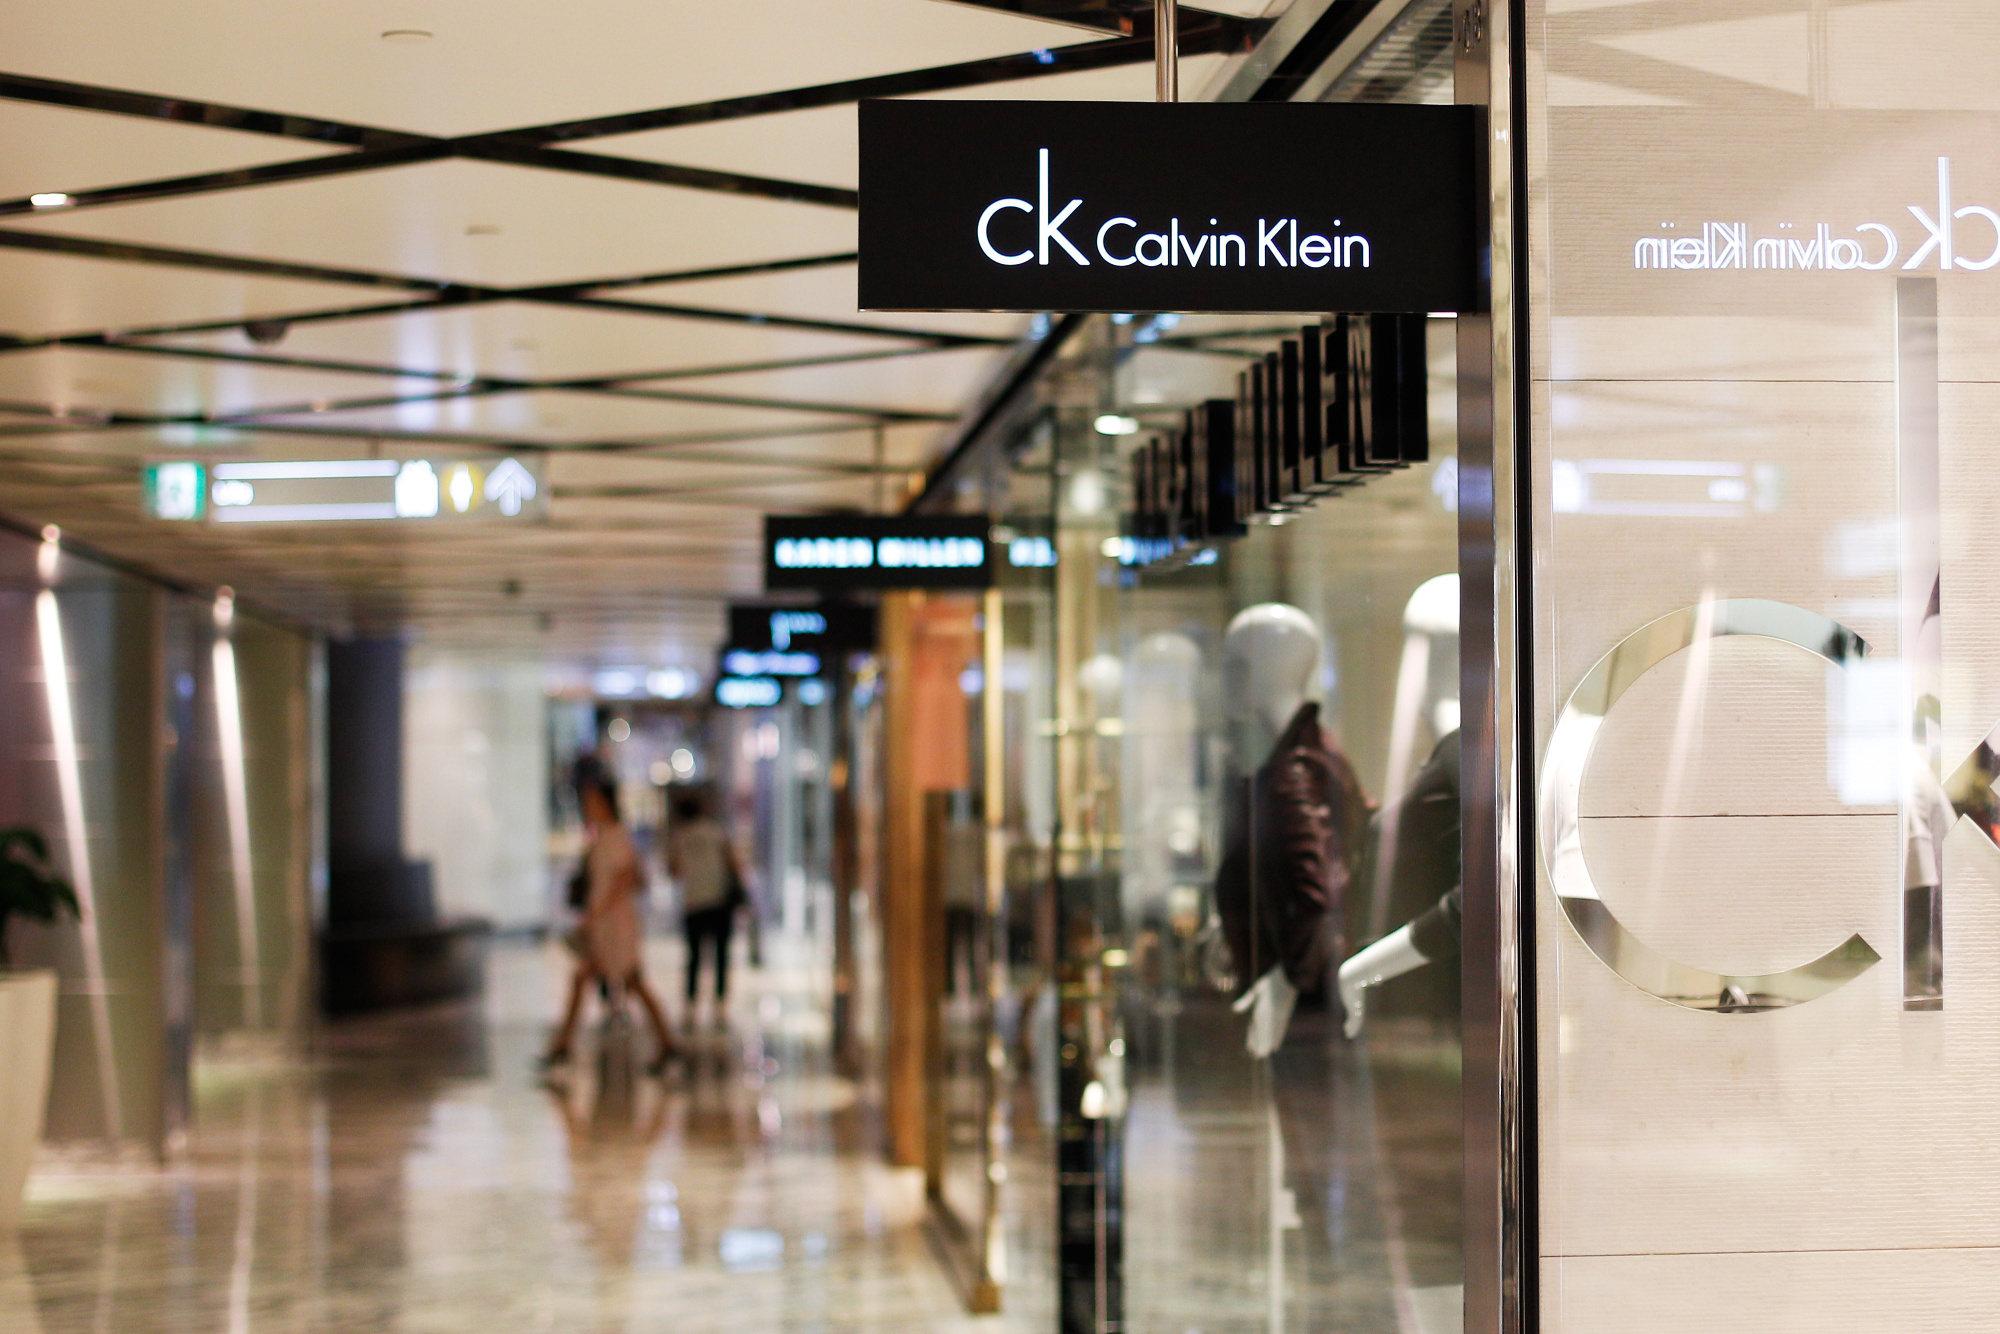 Calvin Klein Exits Collection Business, Leaving 'Halo' Effect Behind